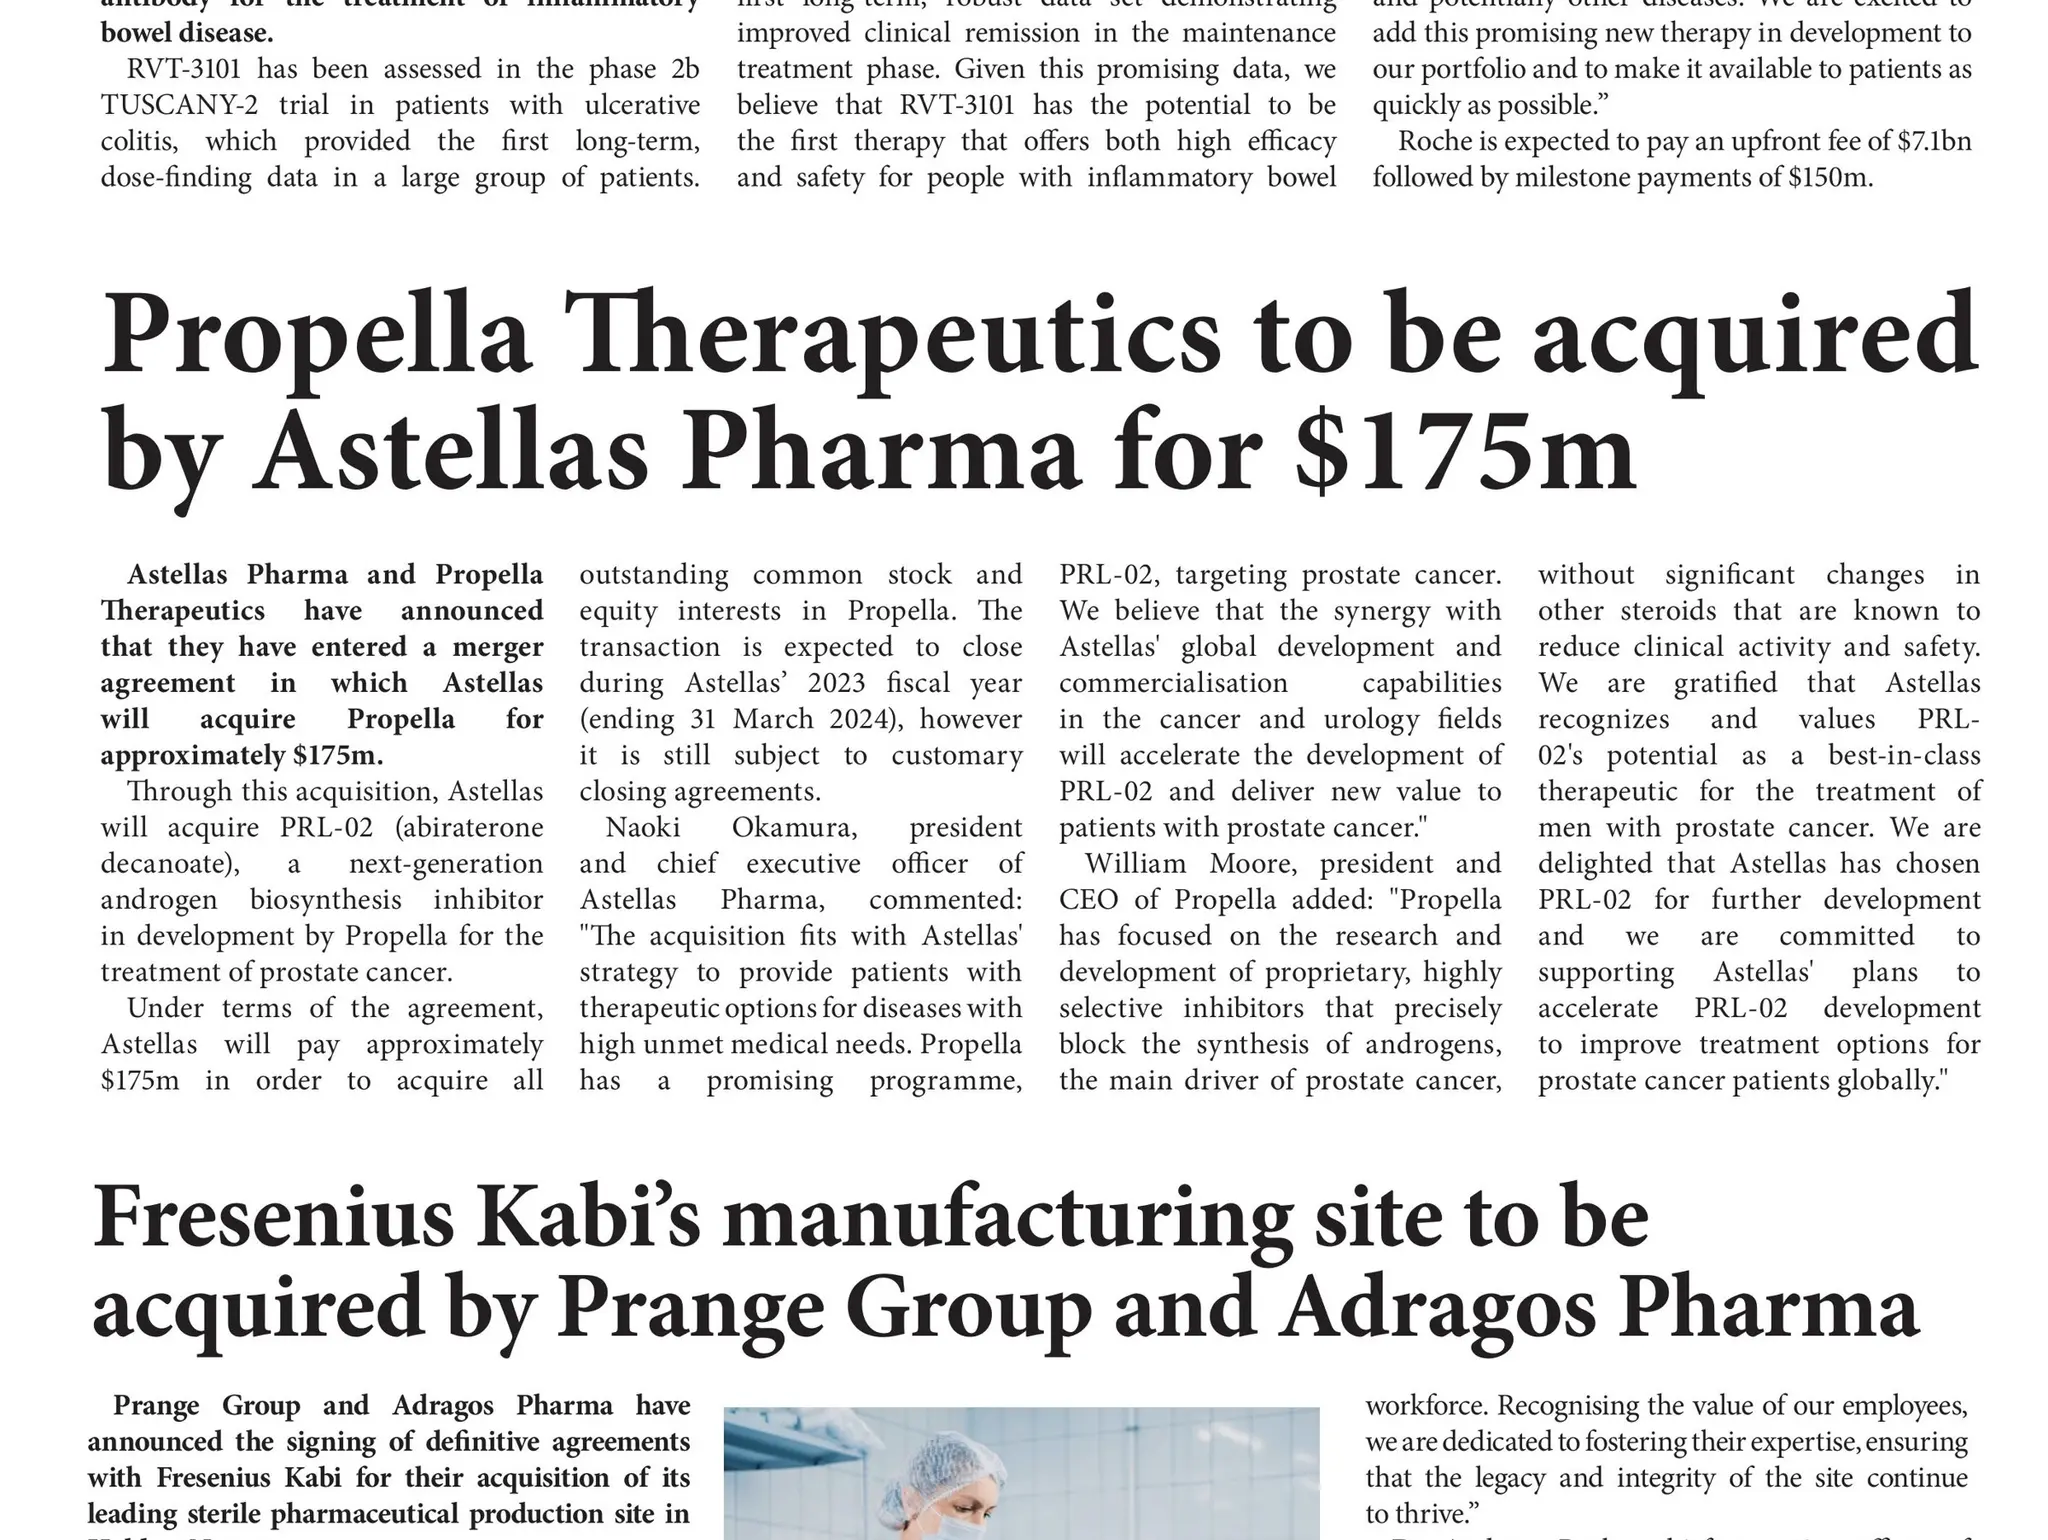 Propella Therapeutics to be acquired by Astellas Pharma for $175m